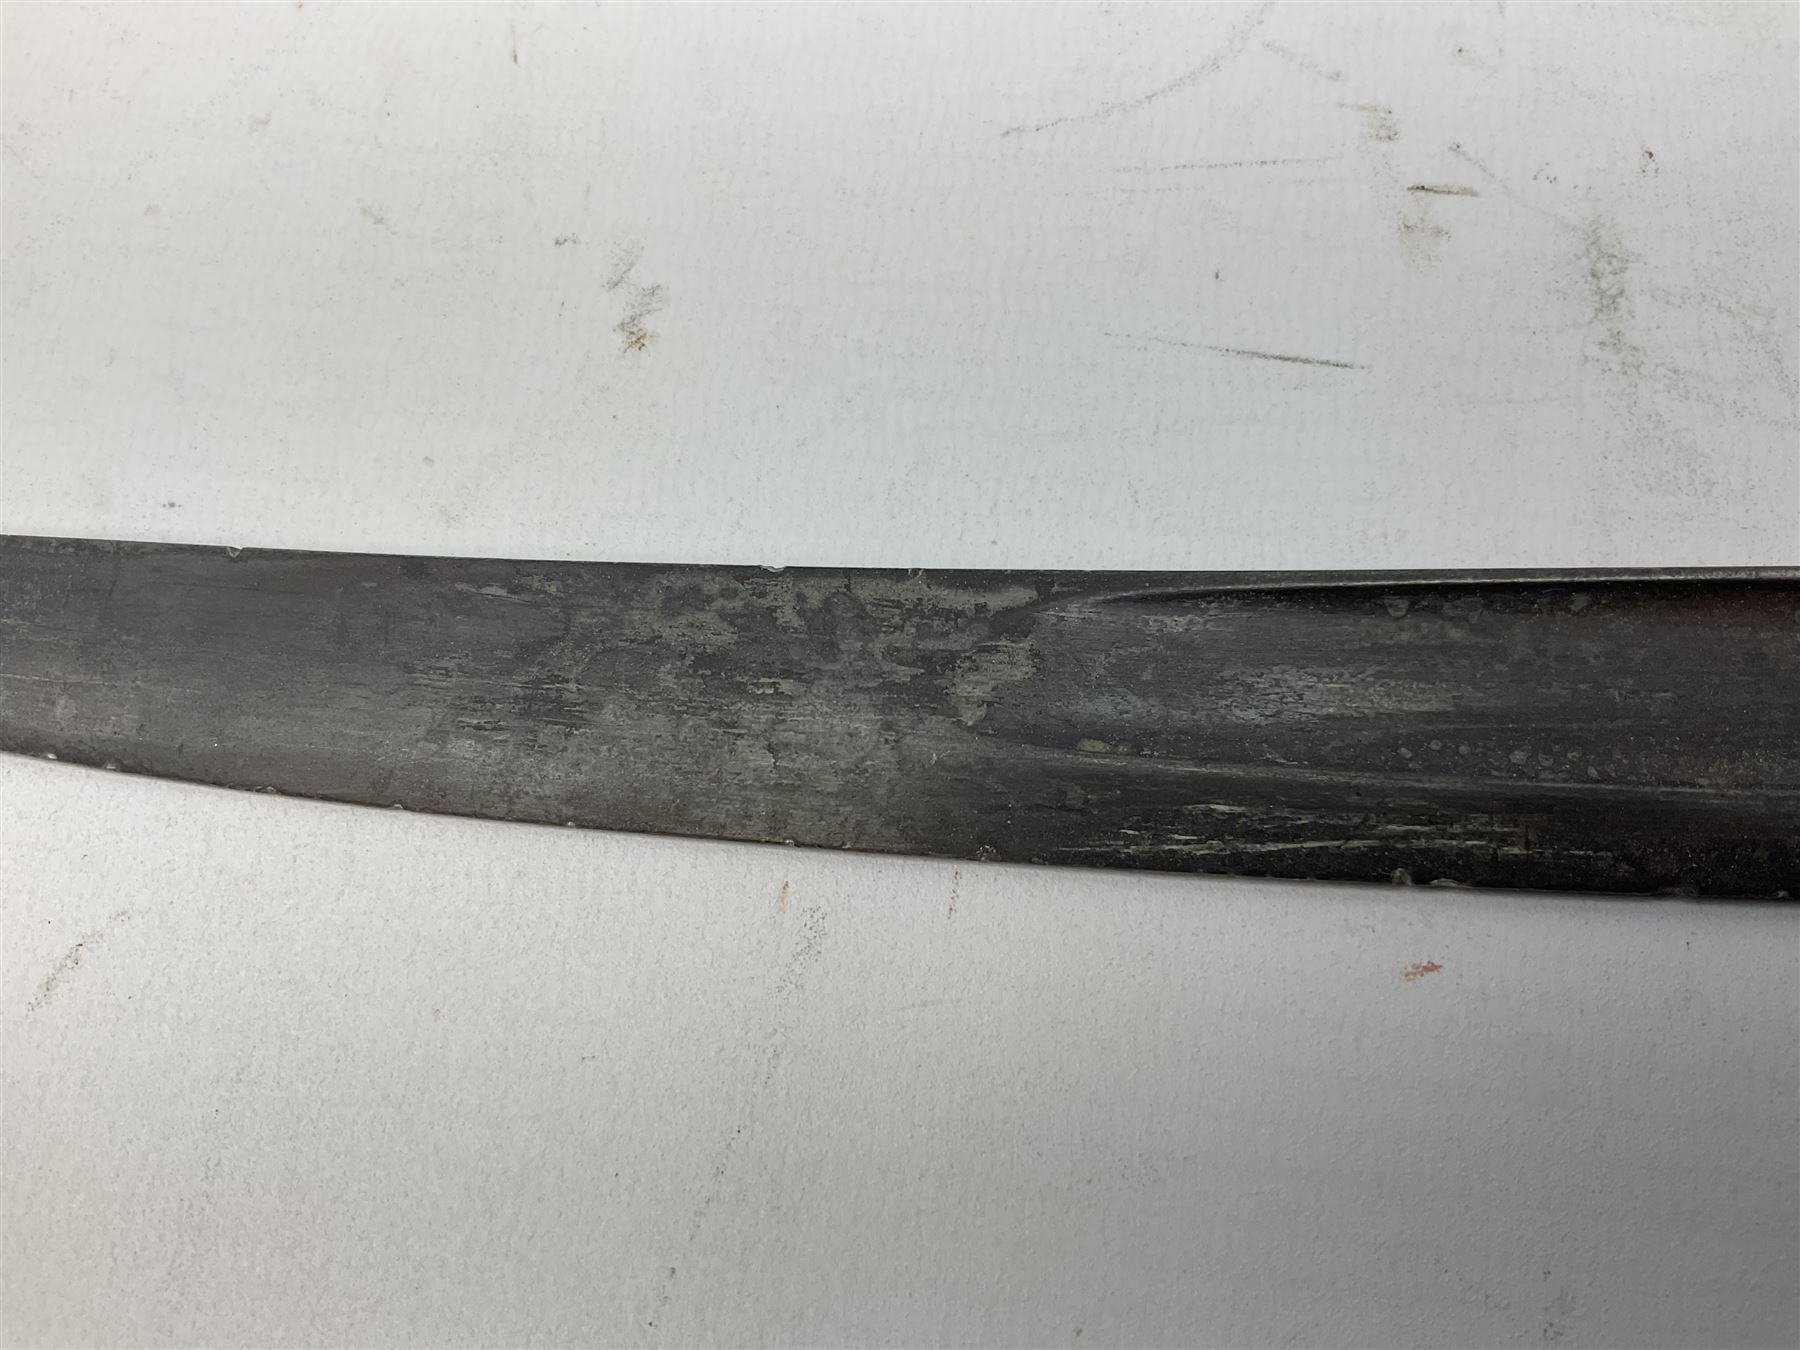 French 1866 pattern sabre bayonet with 57cm fullered steel curving blade dated 1872 - Image 12 of 19